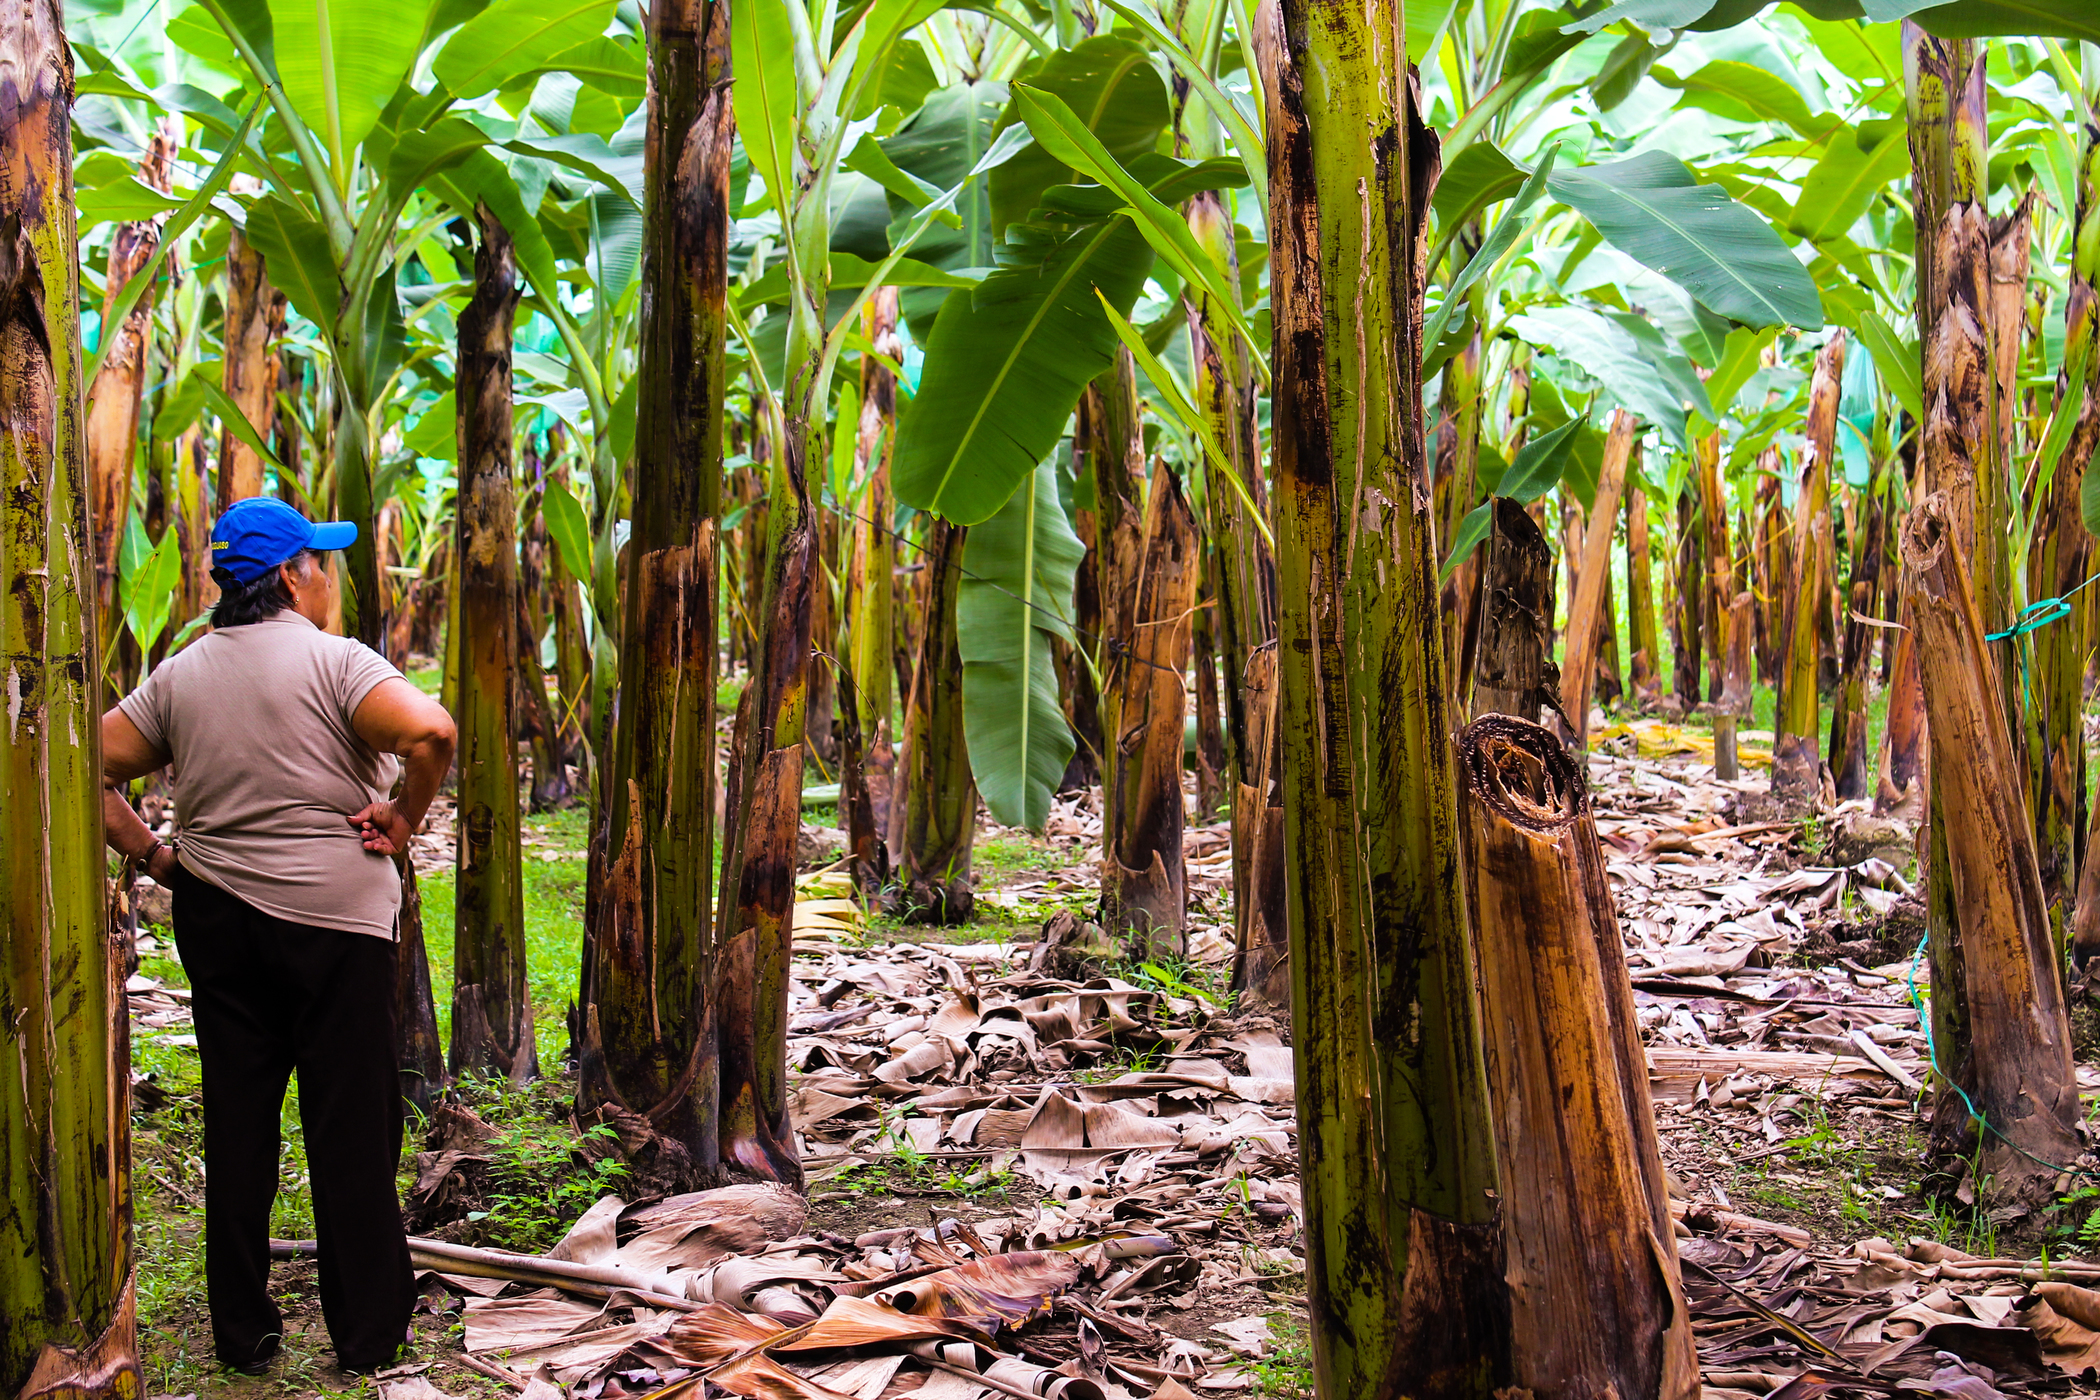 a person stands, hands on hips, next to a field of fair trade banana plants